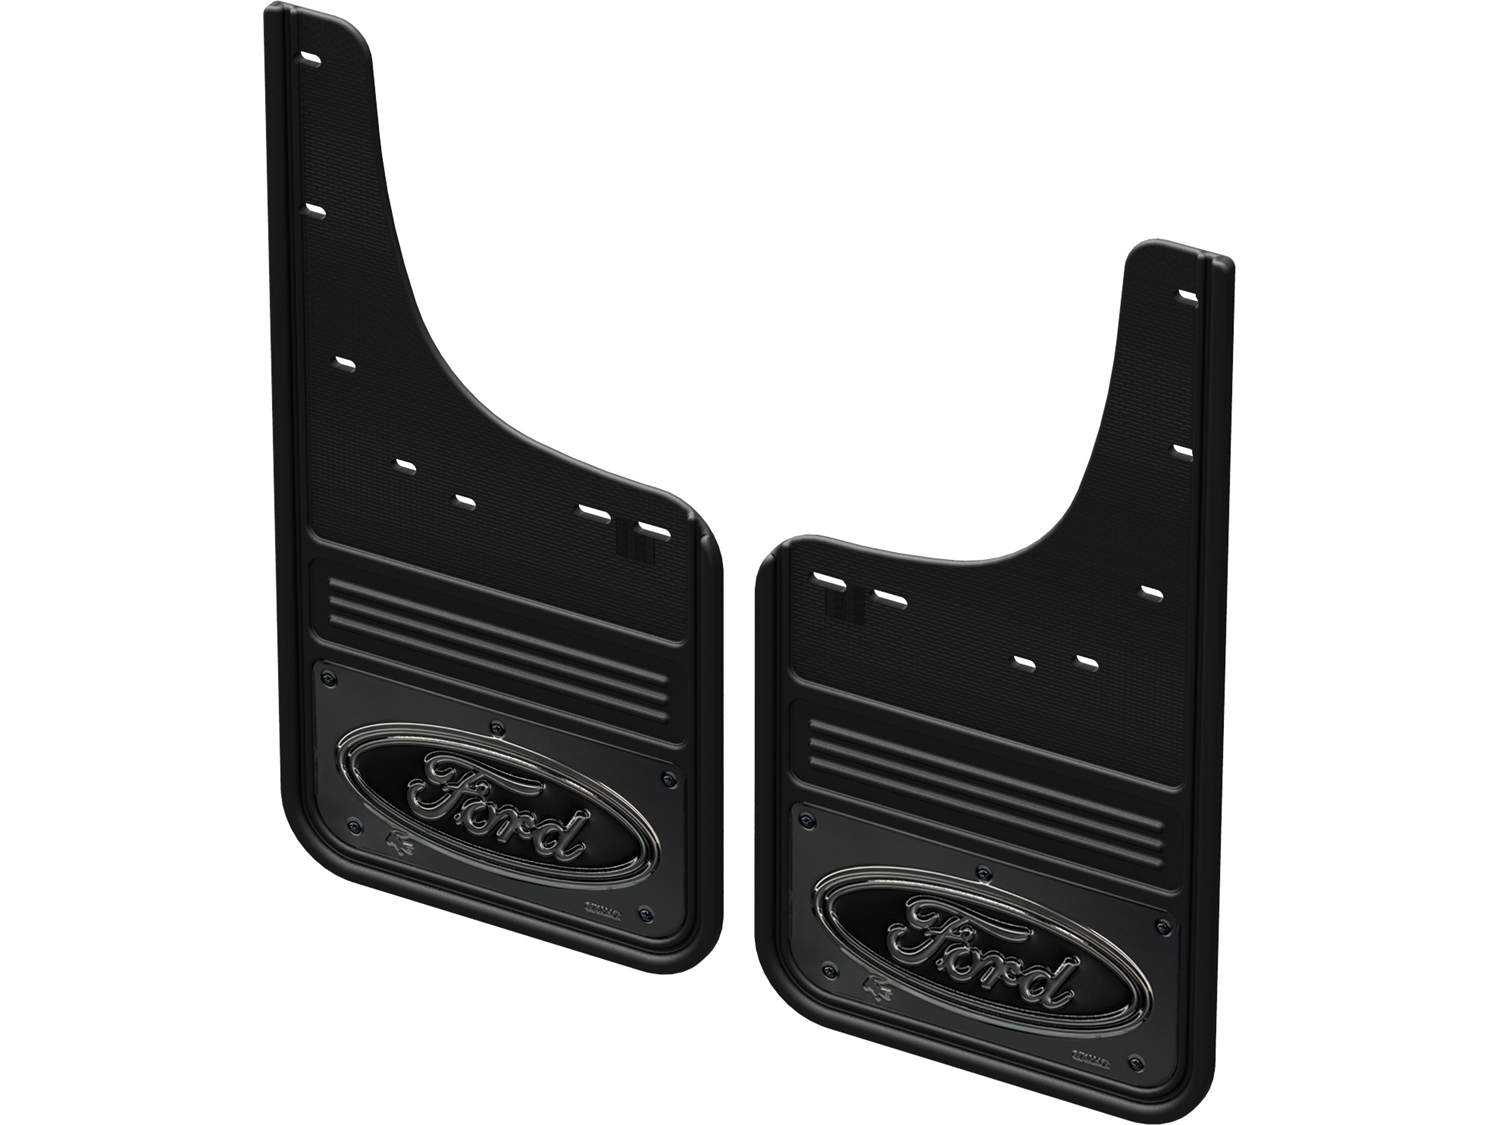 Image for Splash Guards - Gatorback by Truck Hardware, Rear Pair, Black Ford Oval on Gunmetal, for Lightning from AccessoriesCanada